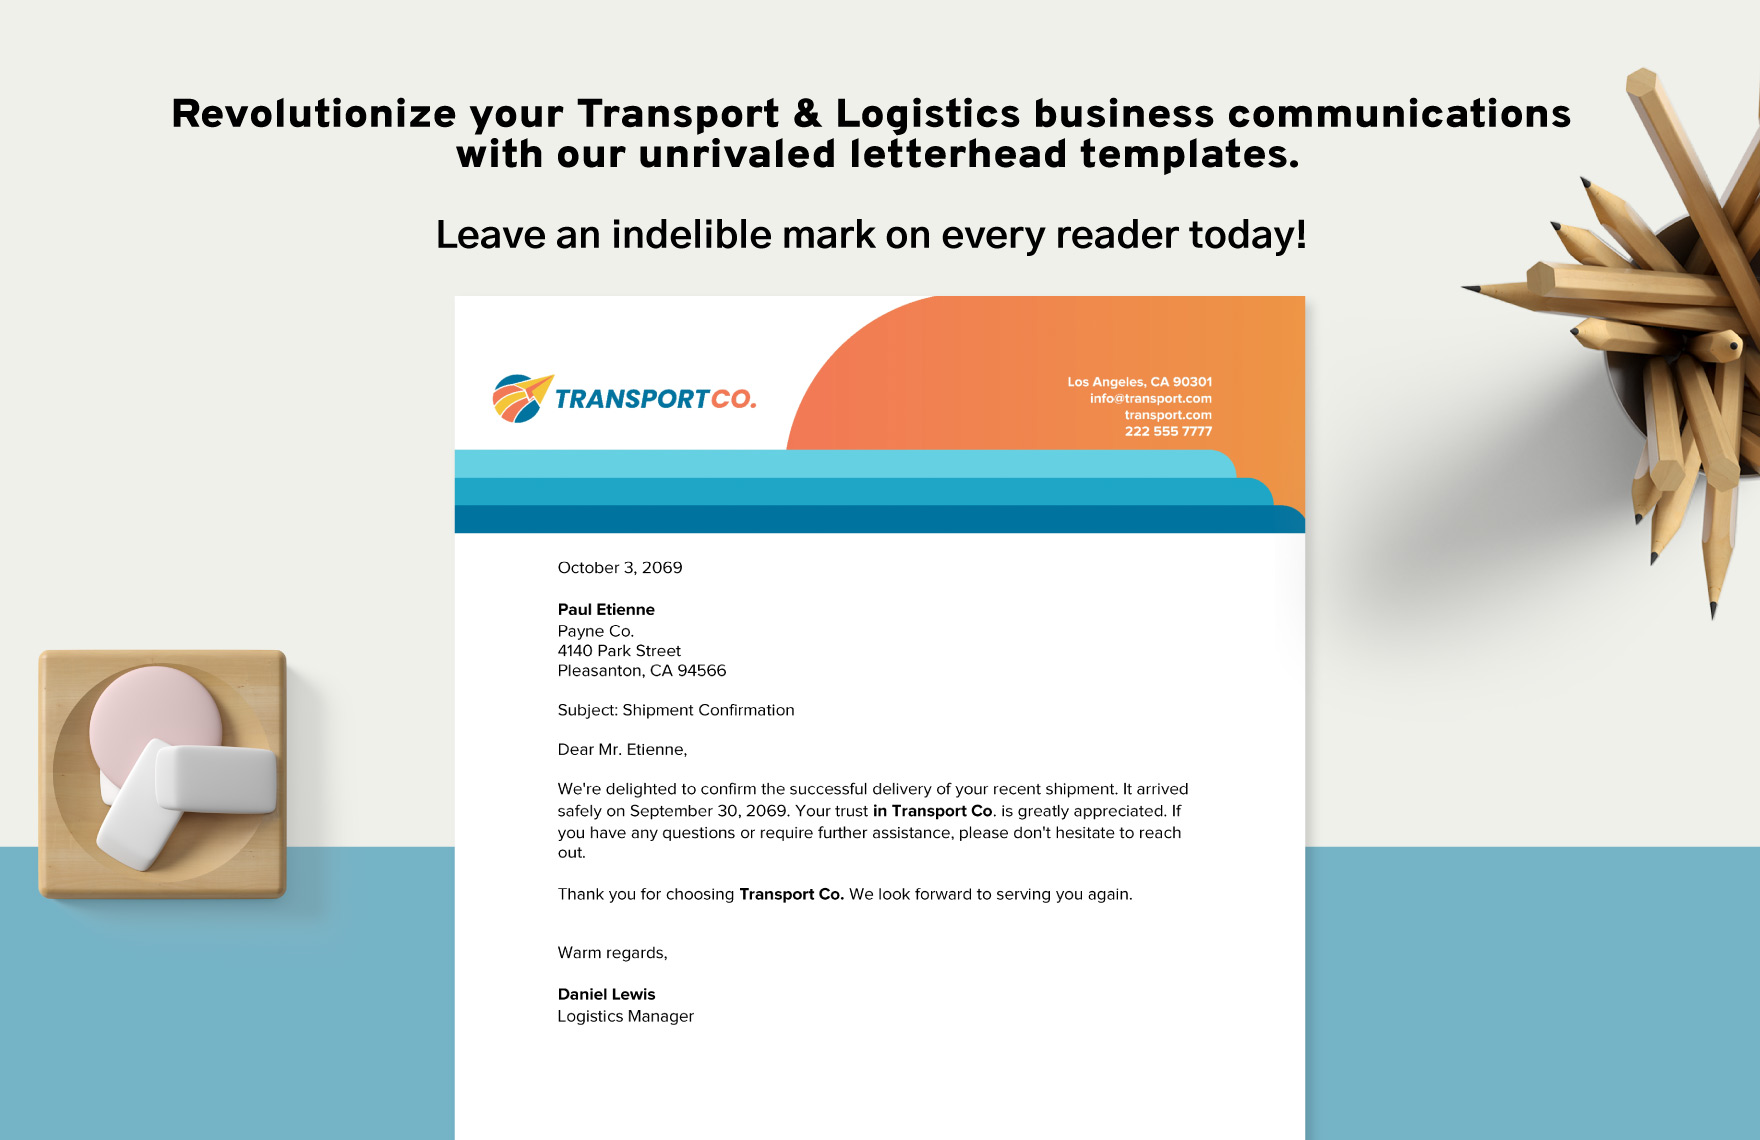 Transport and Logistics Supply Chain Management Letterhead Template